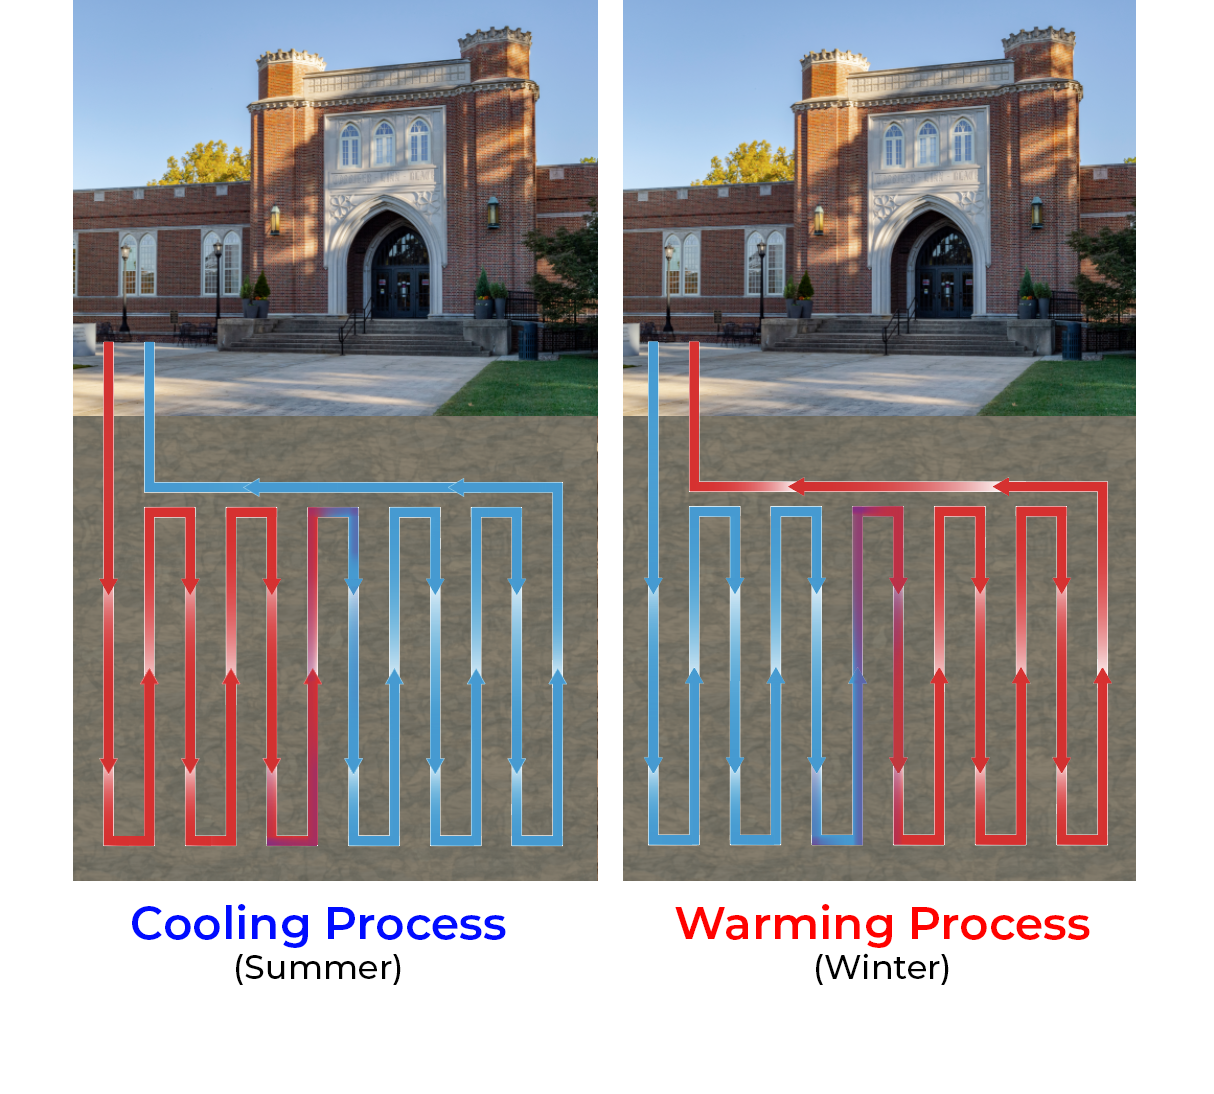 An illustration showing how the library is heated during the winter and cooled during the summer.